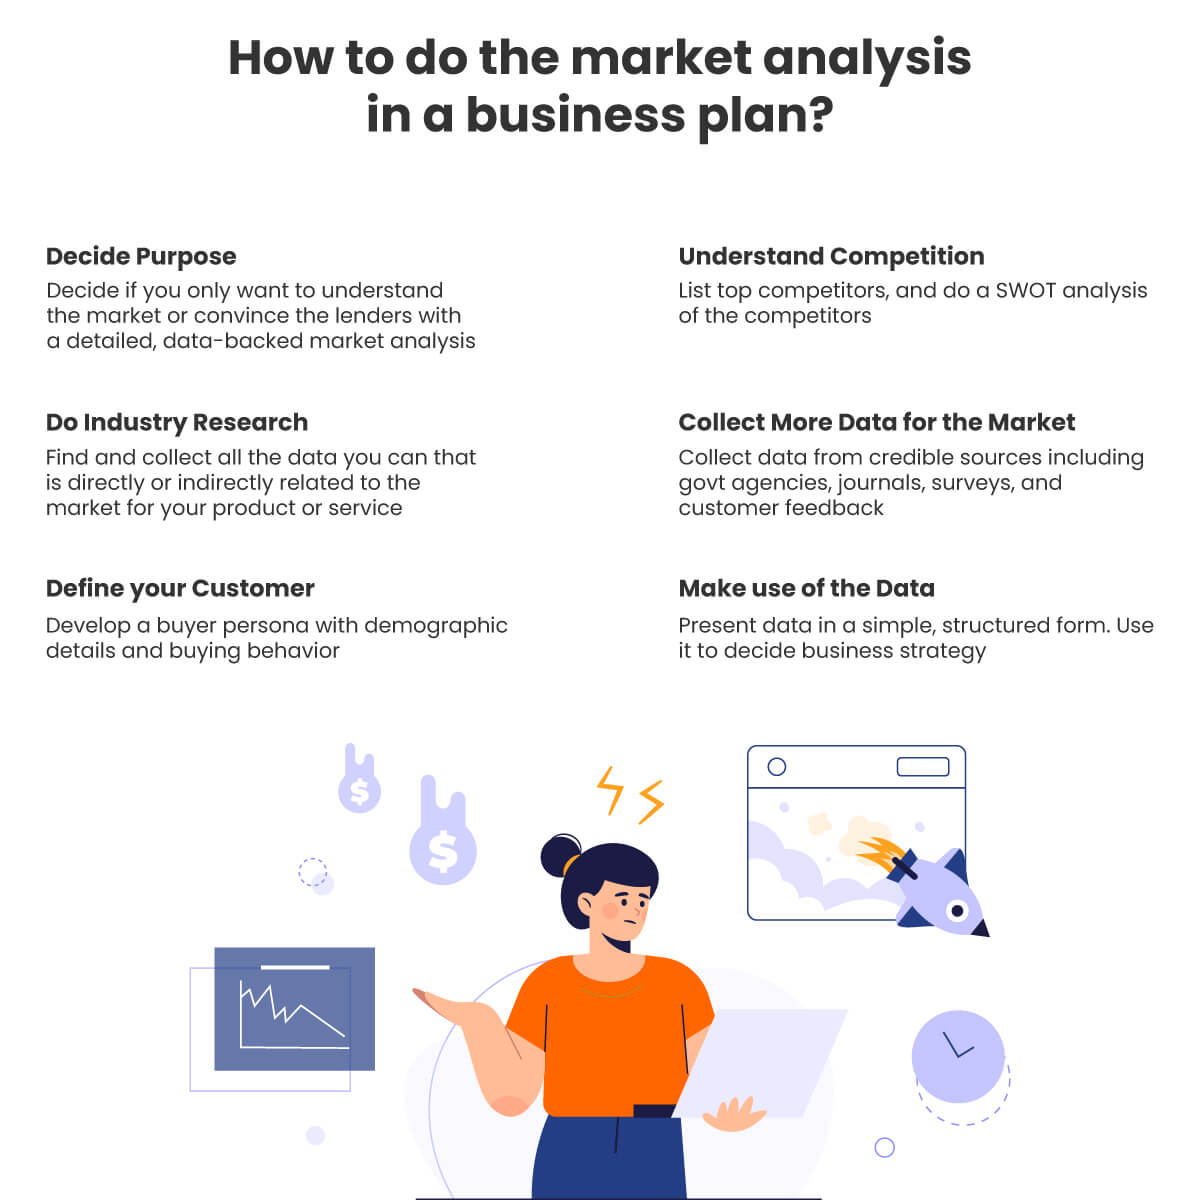 How to do market analysis in a business plan